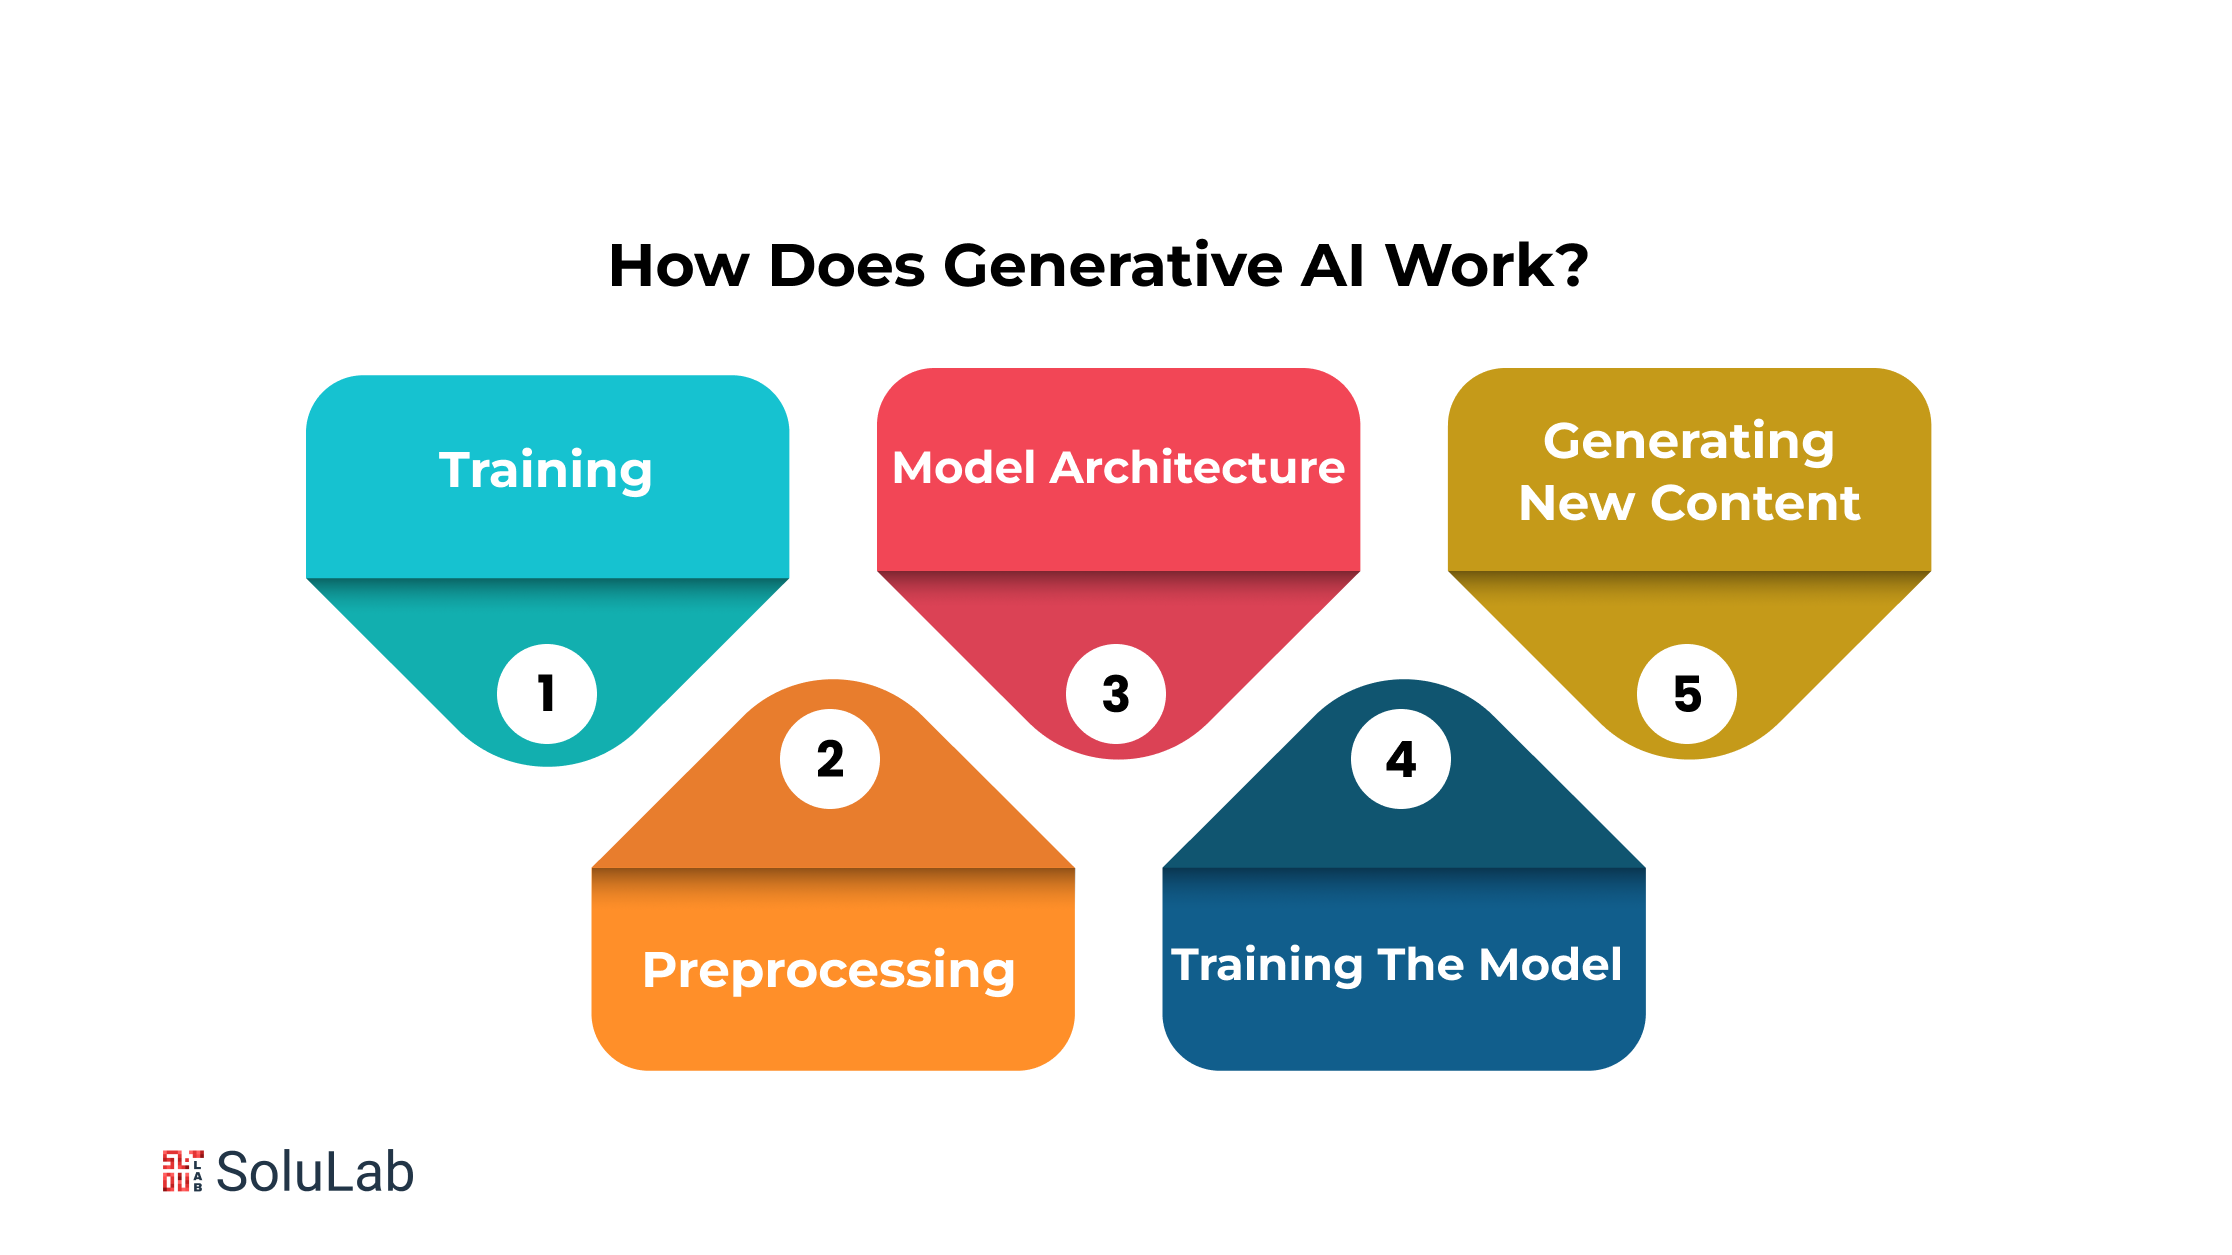 How Does Generative AI Work?